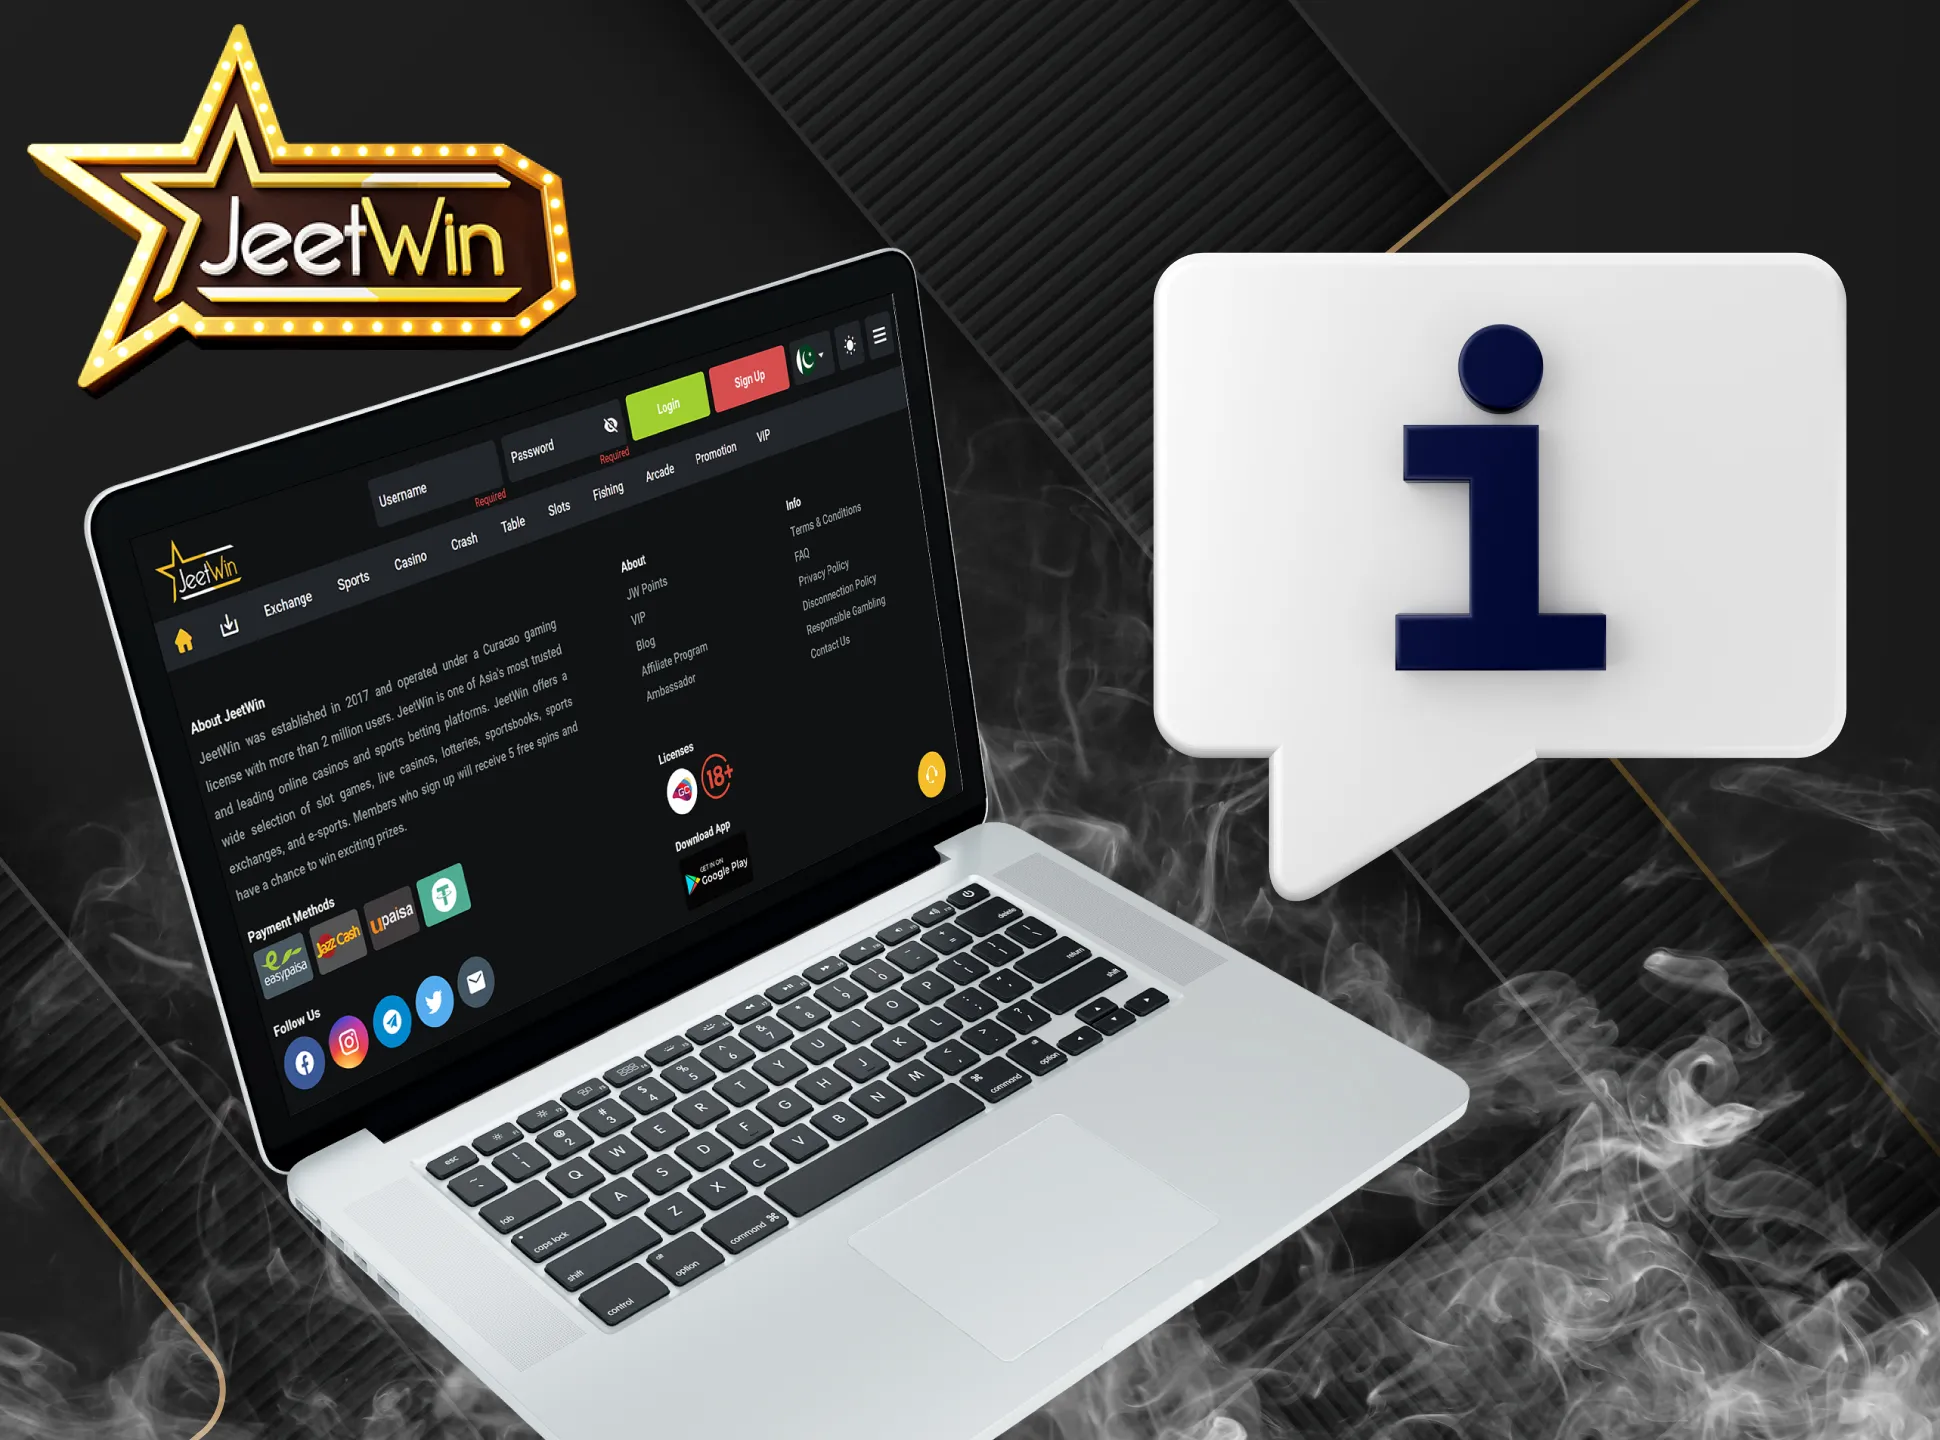 Play online casino and bet on sports with JeetWin.